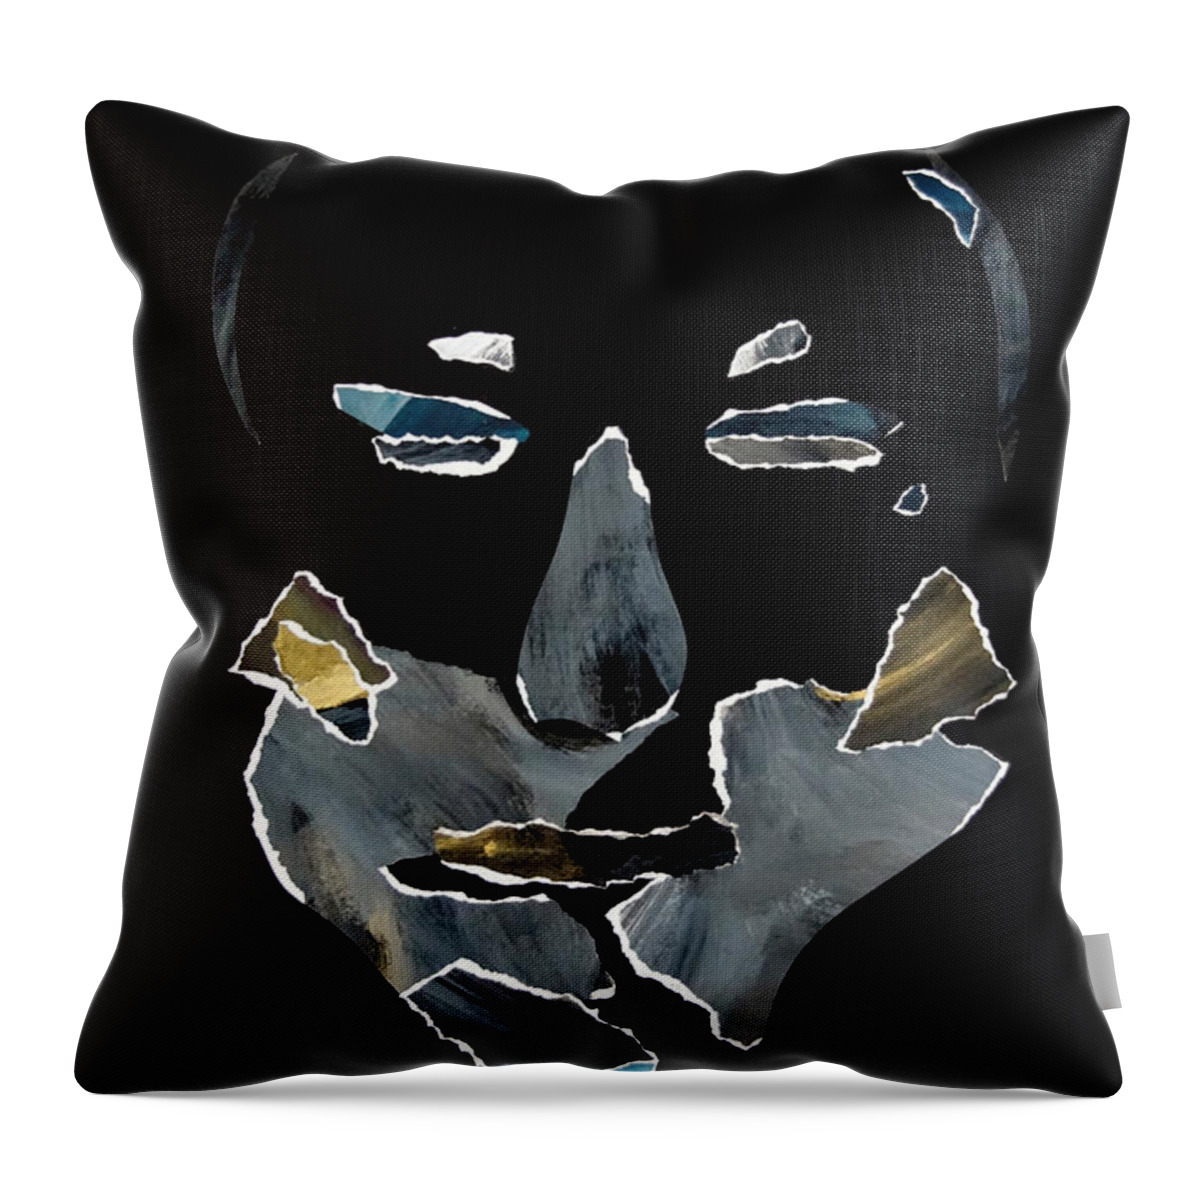 Face Throw Pillow featuring the mixed media Every life is a moment in time by Jolly Van der Velden